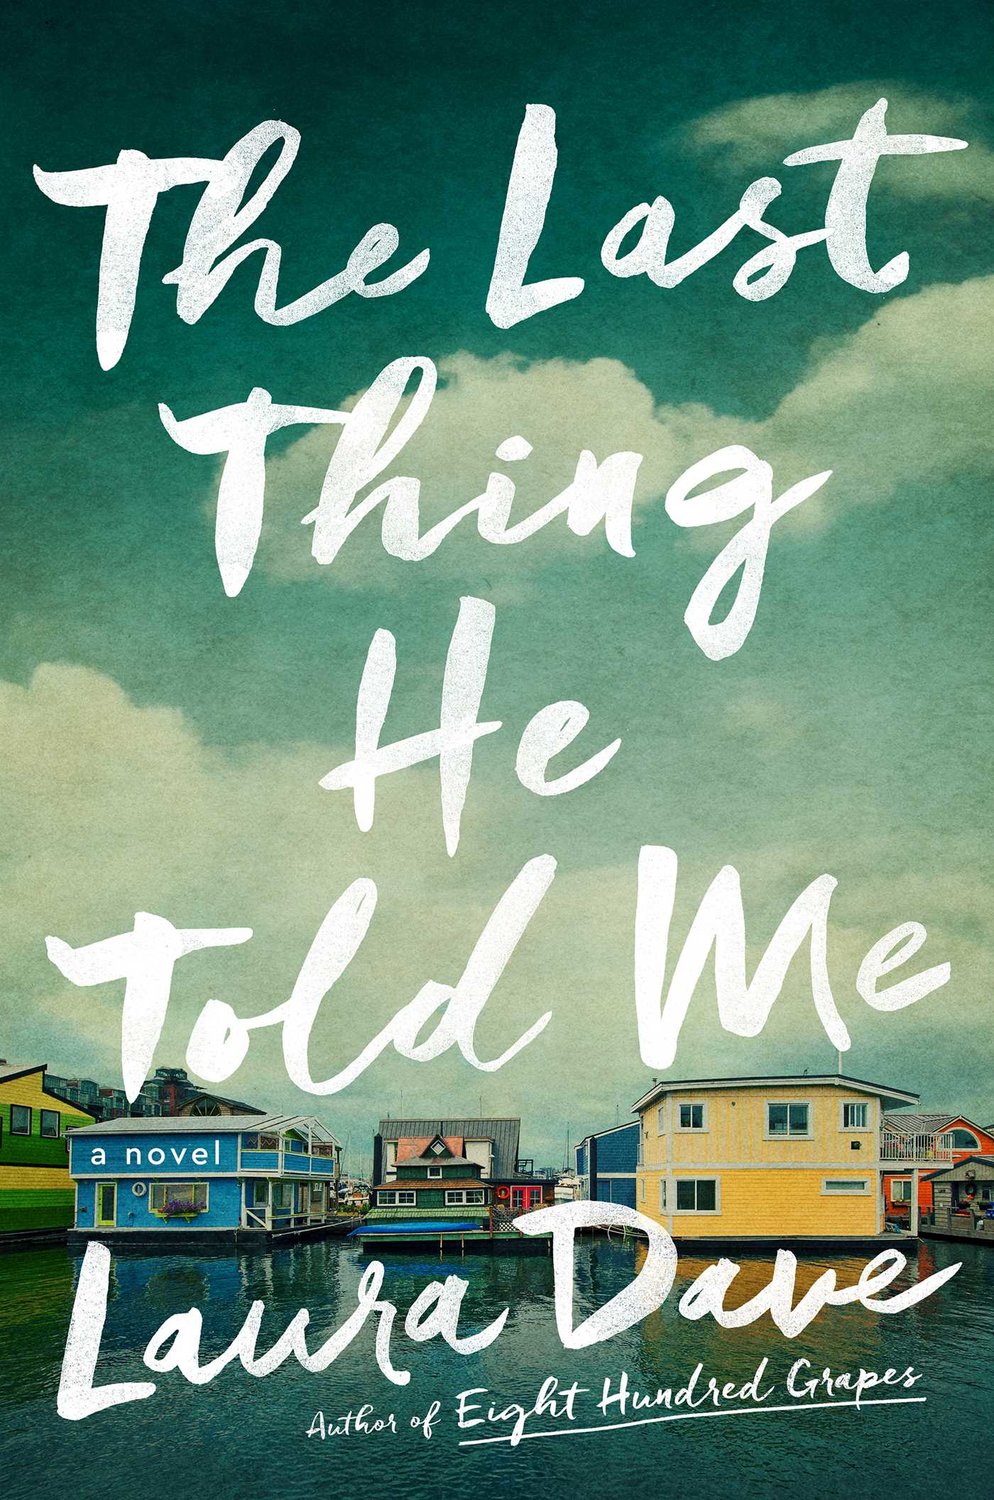 “The Last Thing He Told Me” by Laura Dave